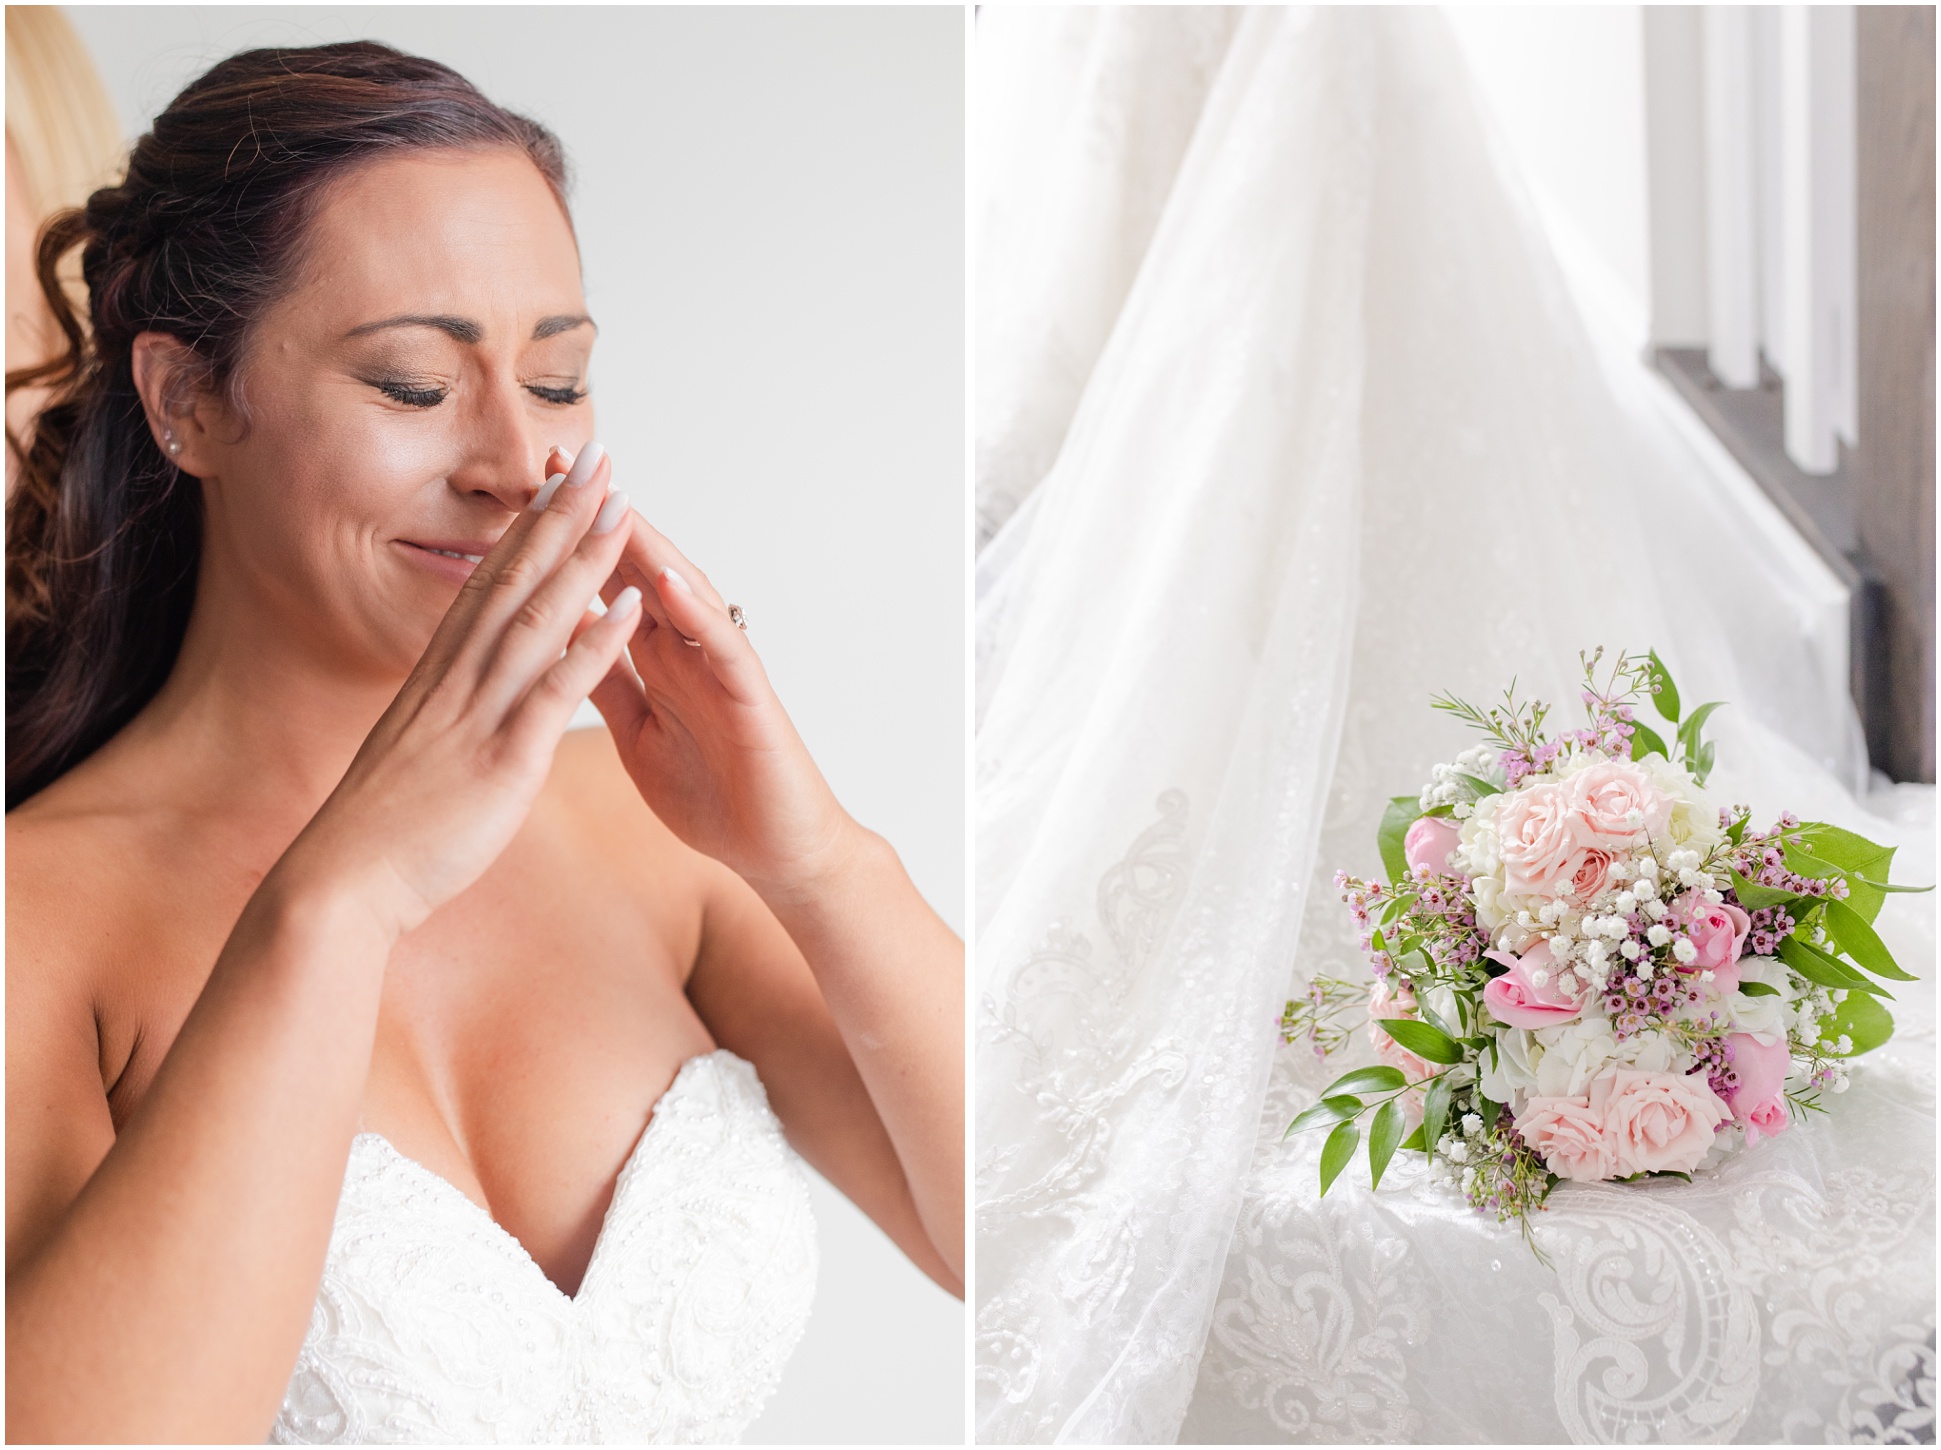 Left: the Bride crying, Right: bridal bouquet sitting on the train of the bride's wedding gown